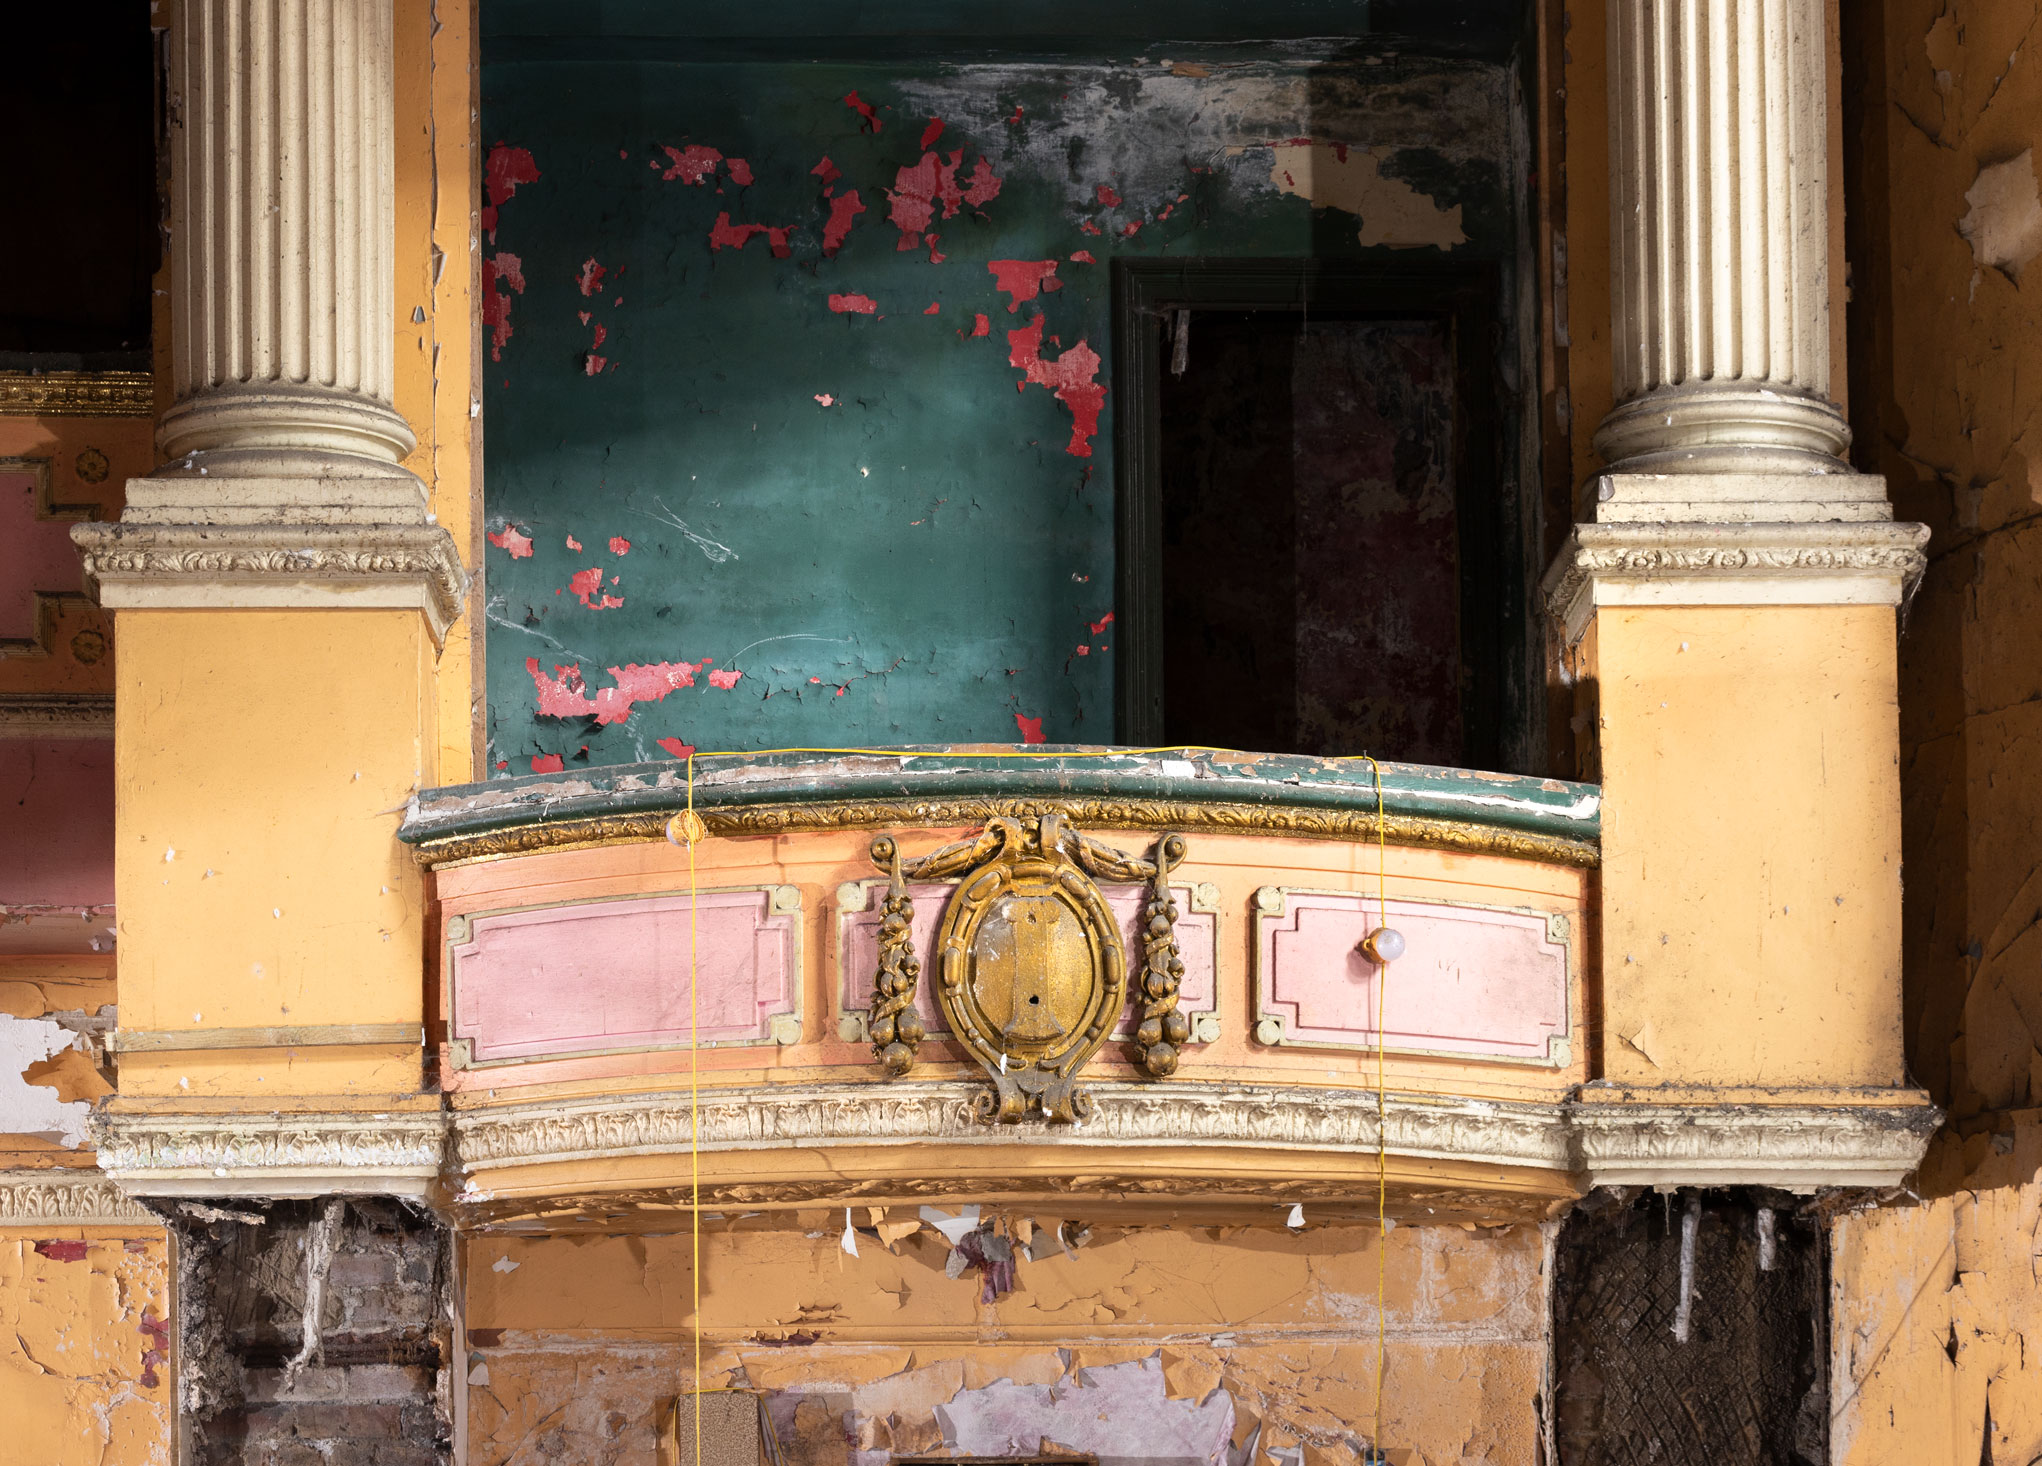 Detail of an ornate but derelict theatre interior, a balcony front with decorative moulding, flanked by columns.